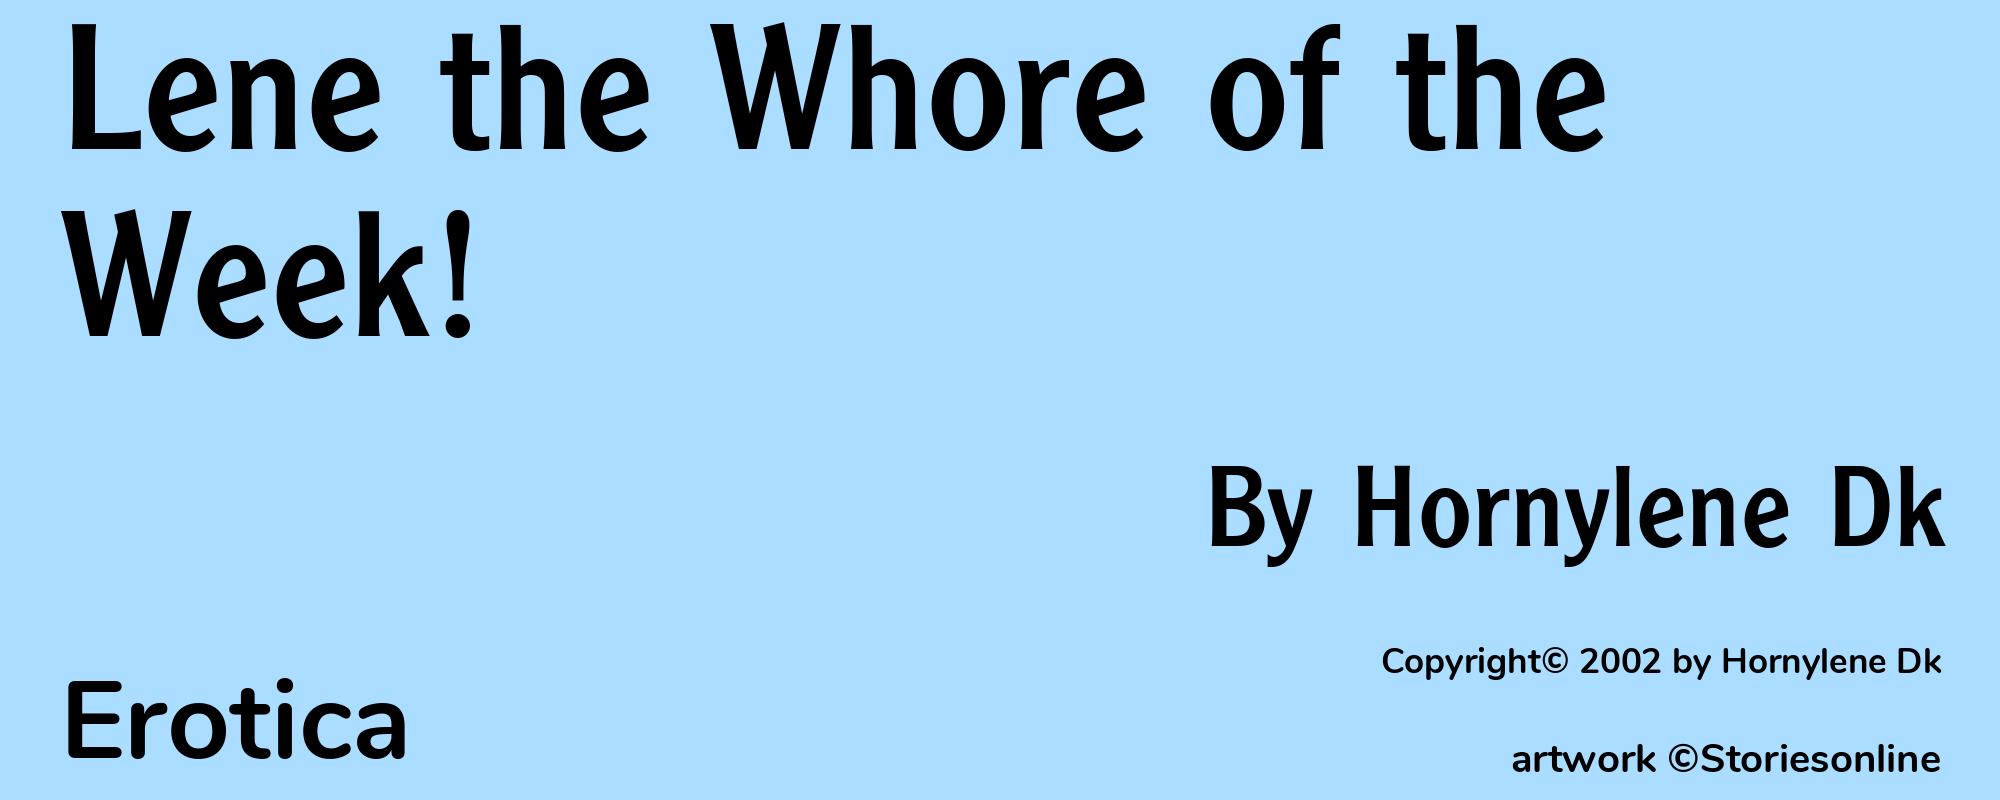 Lene the Whore of the Week! - Cover